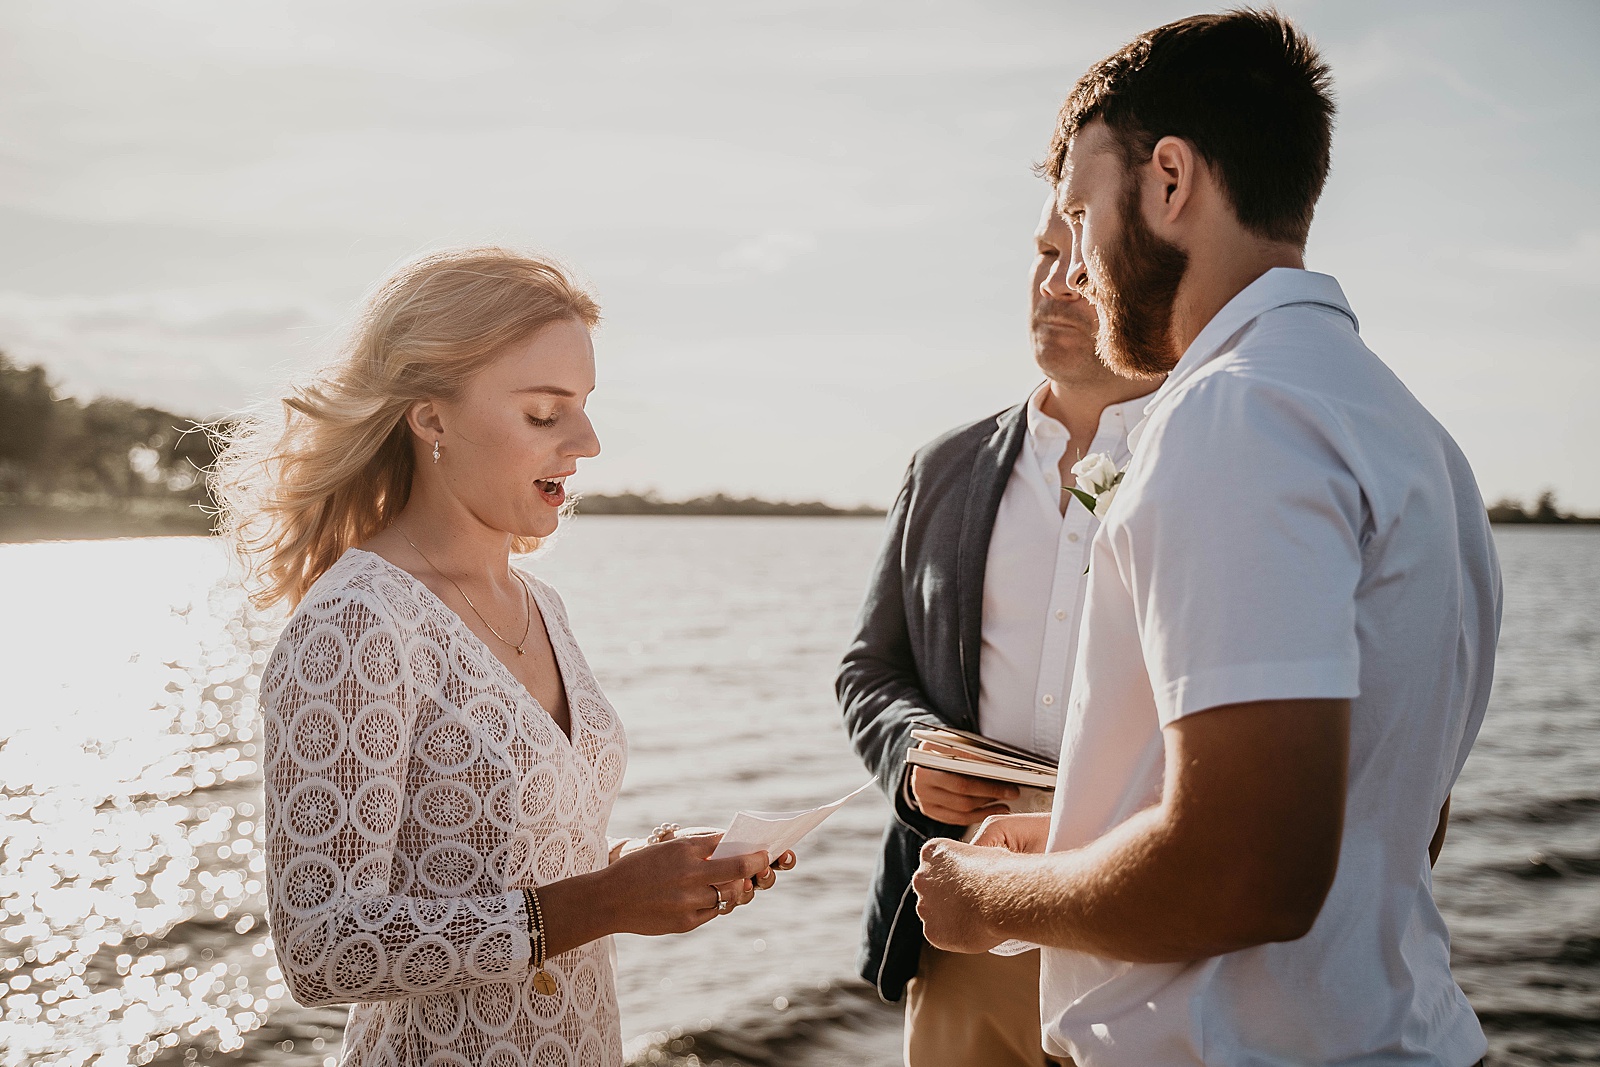 South Florida Waterfront Elopement ceremony vows captured by South Florida Elopement Photographer, Krystal Capone Photography